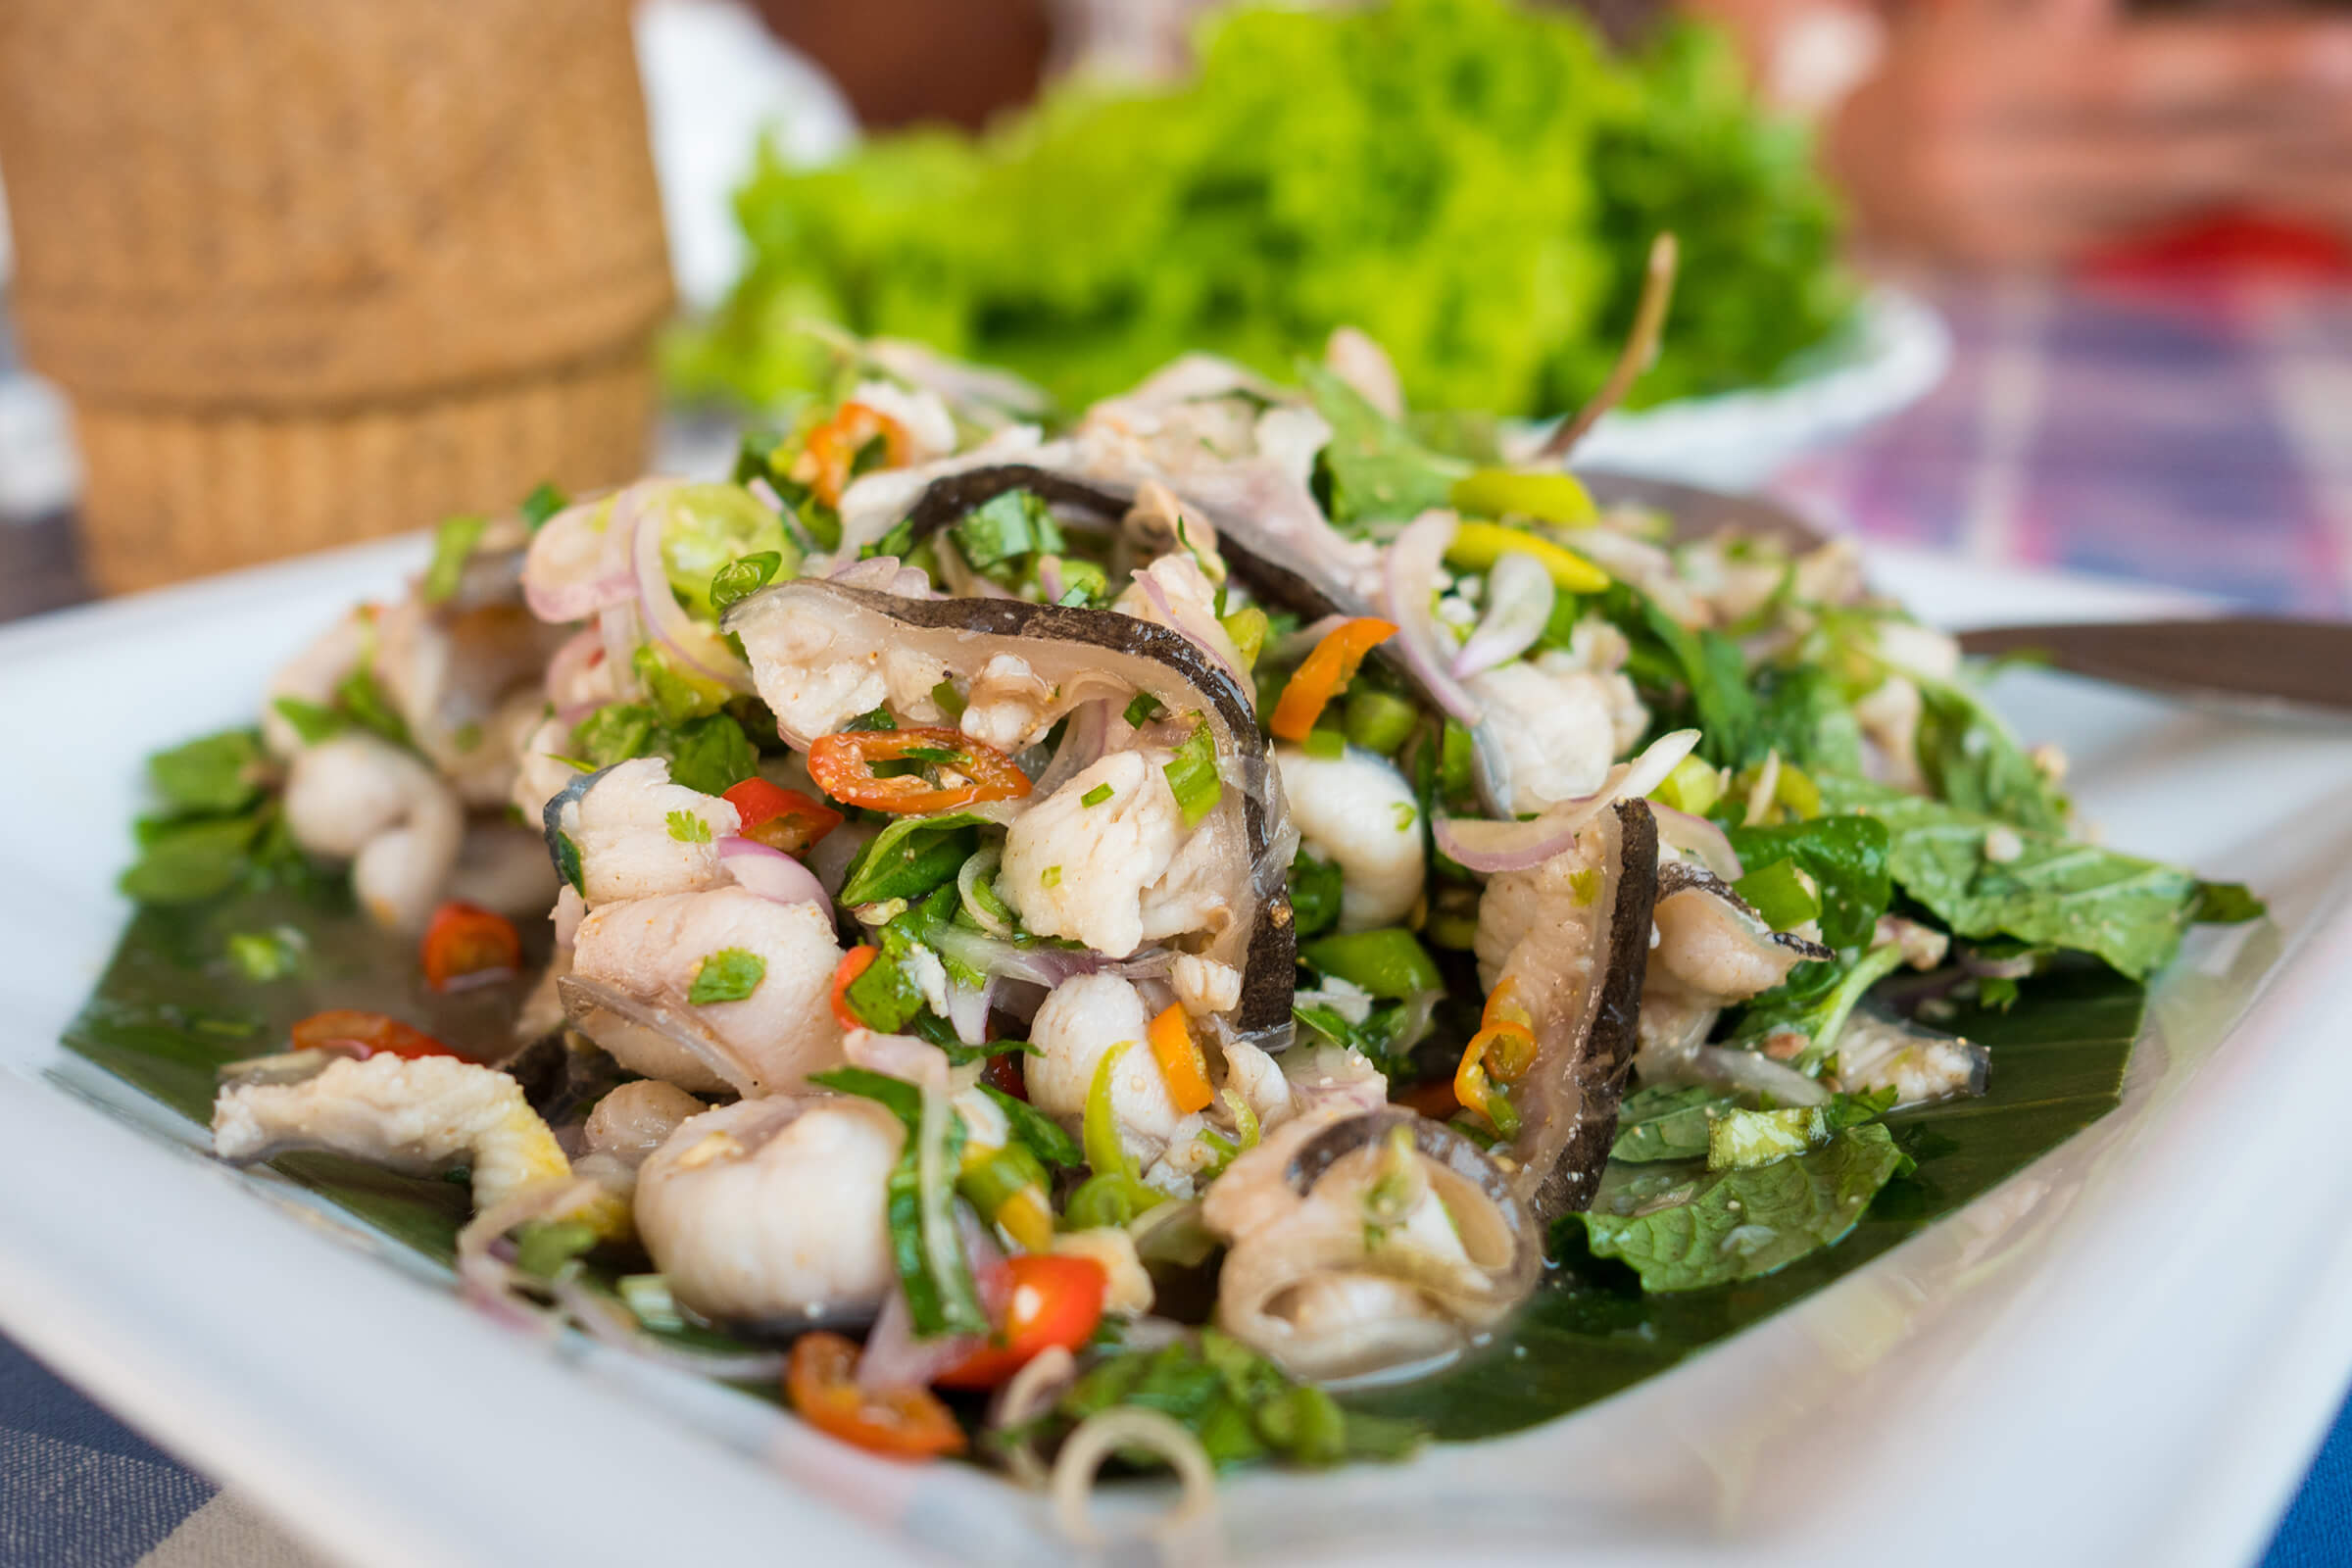 Laos Food – 12 of The Best Laotian Dishes You Need to Eat